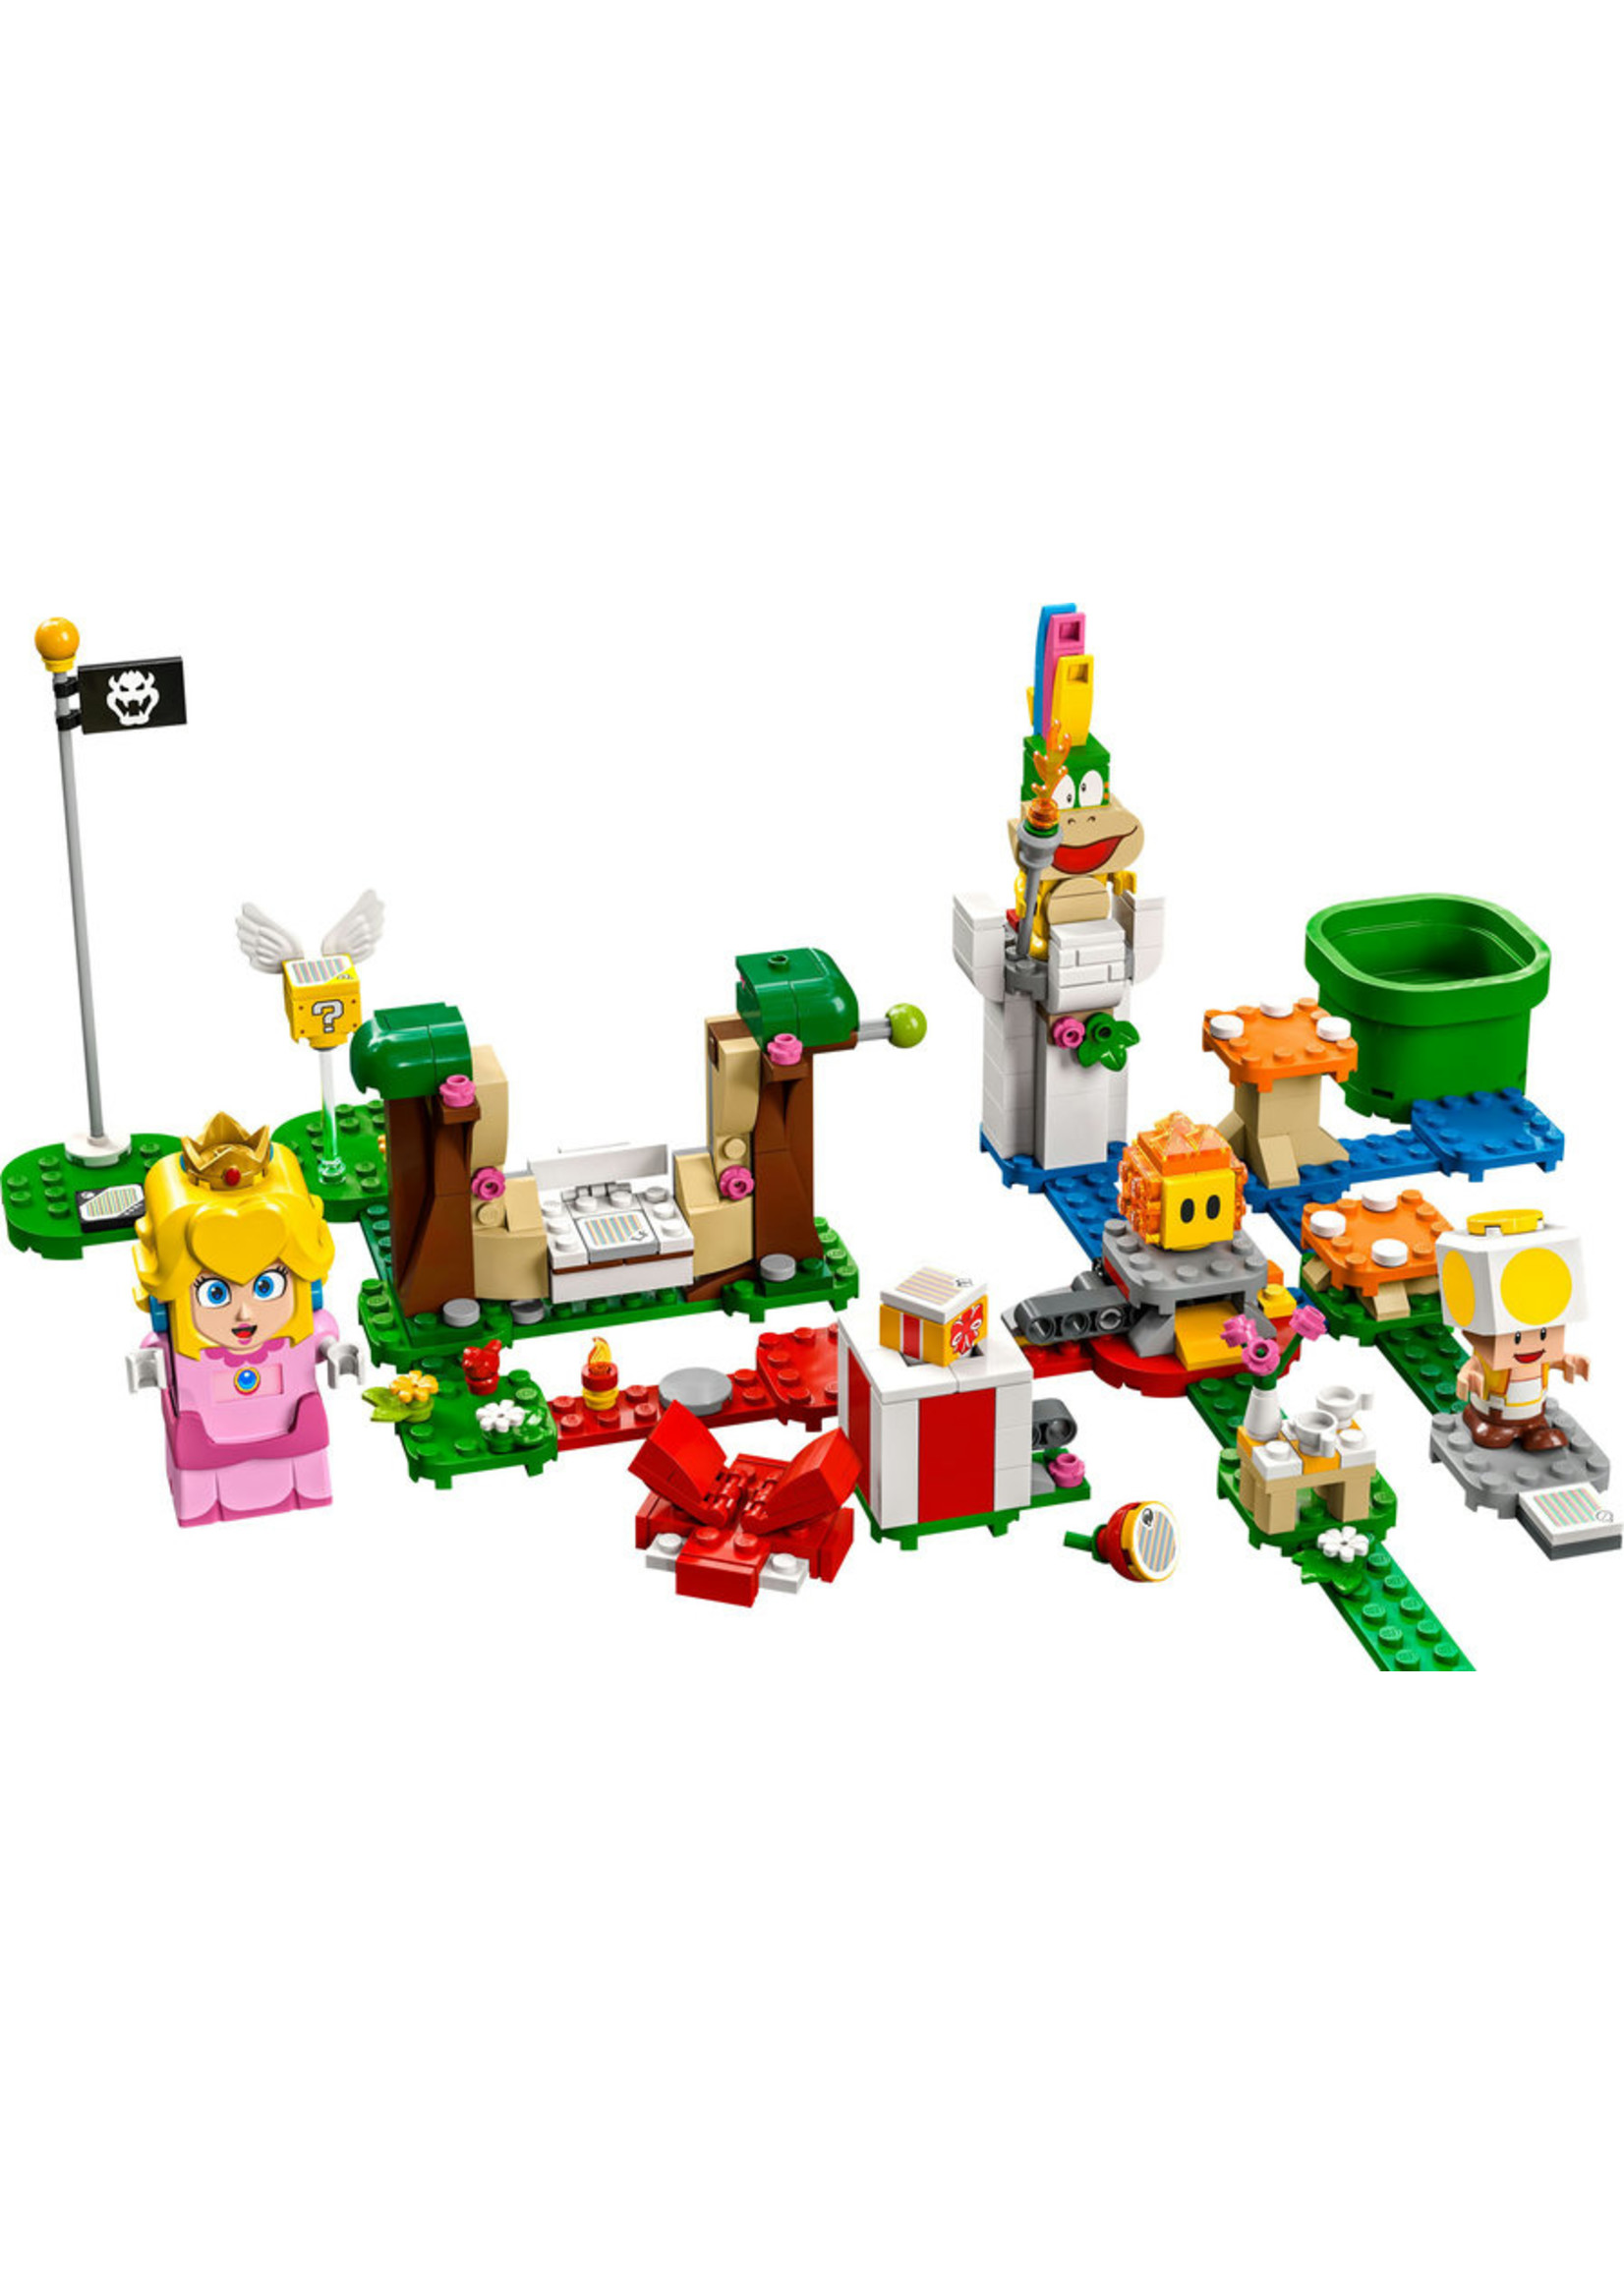 LEGO 71403 - Adventures with Peach Starter Course